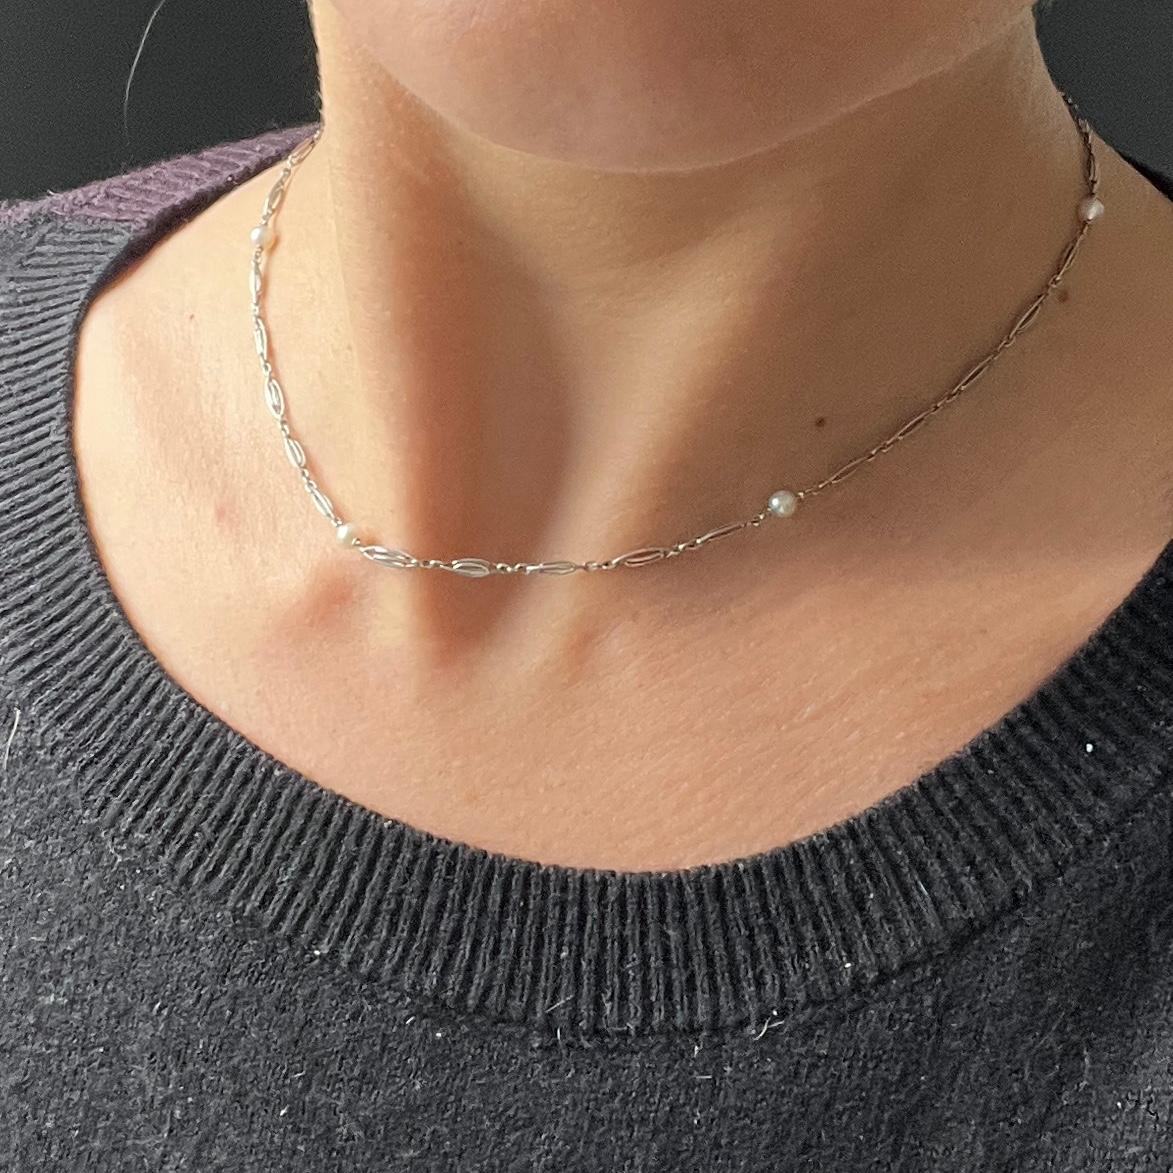 This necklace has a very delicate feel and is made up of a fine and detailed platinum chain and holds a single  pearls. 

Length: 37cm
Pearl Diameter: 4mm

Weight: 4.8g